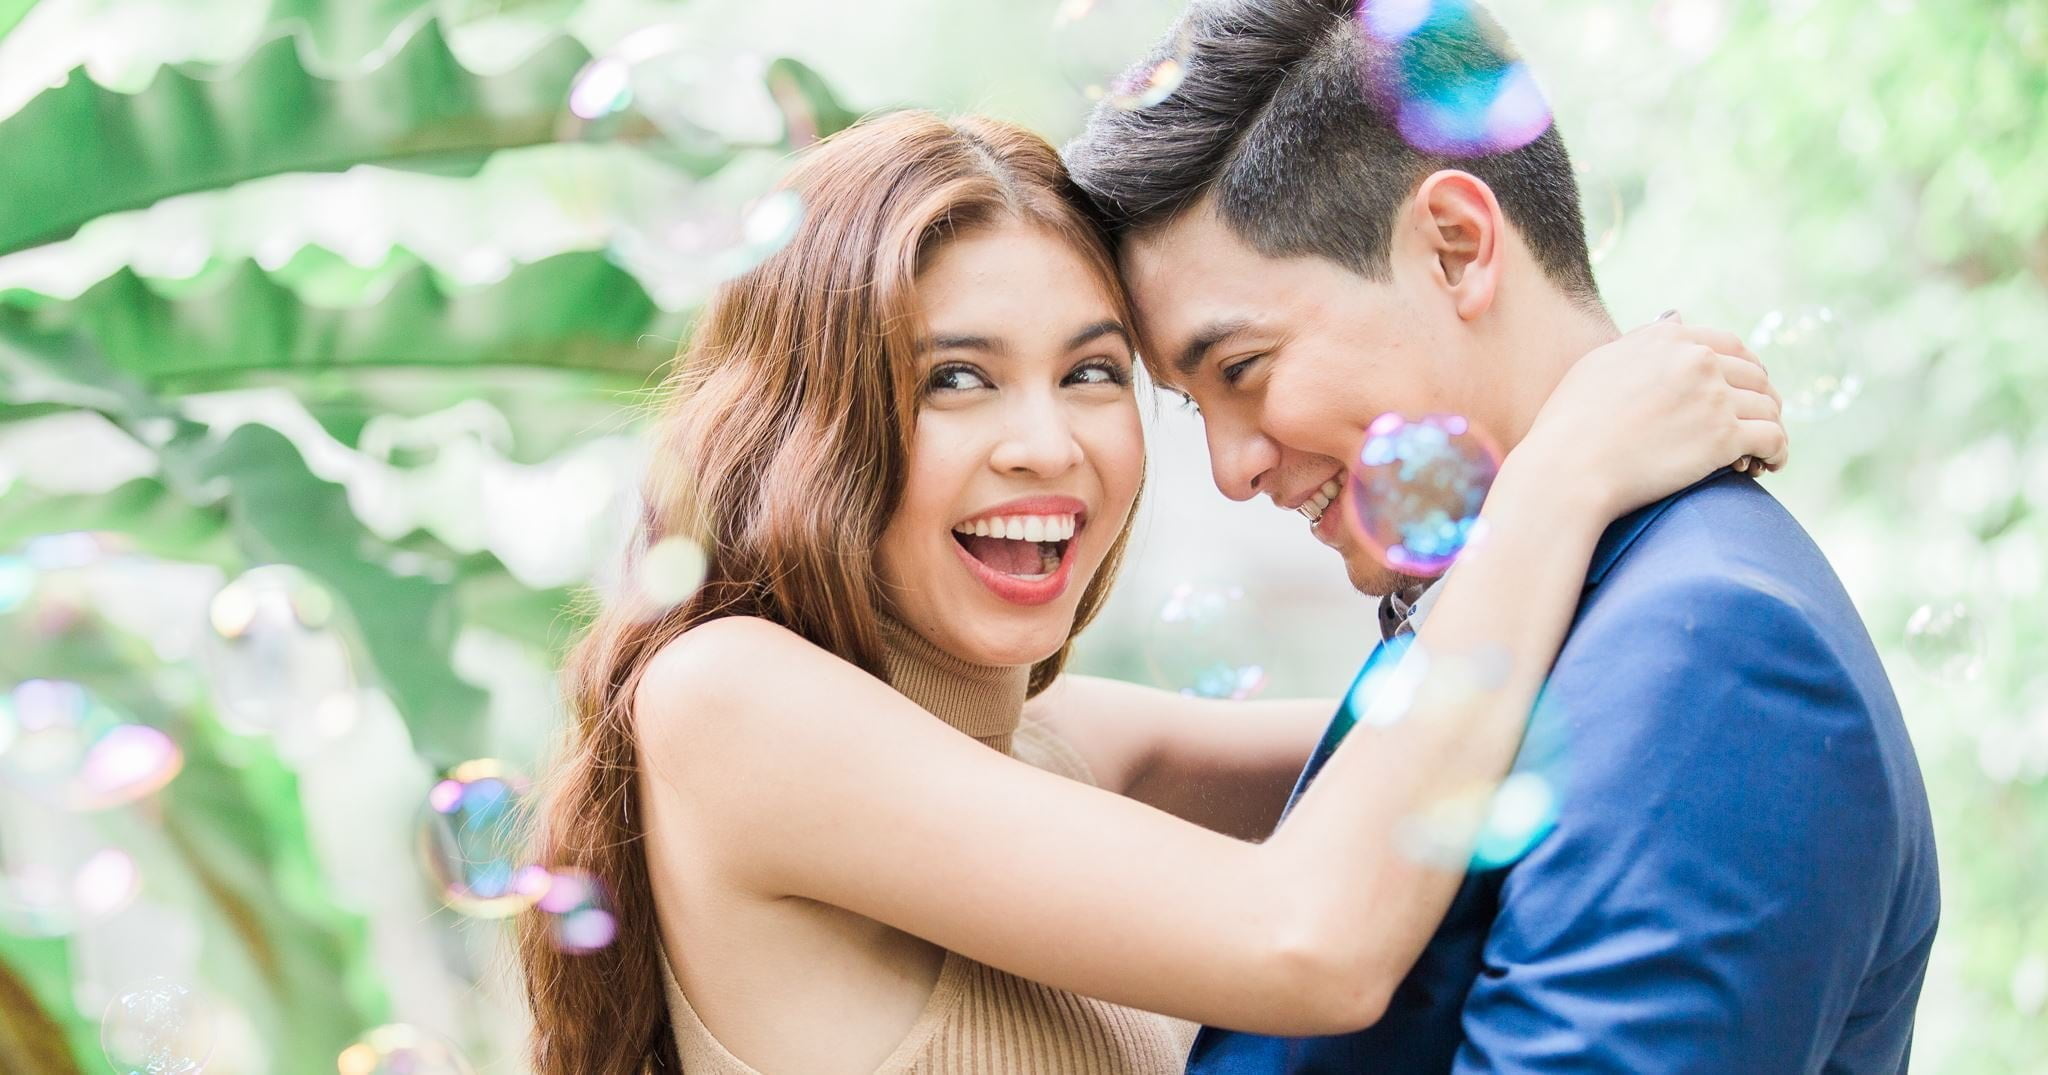 Maine Mendoza and Alden Richards in one of AlDub prenup photos (Eat Bulaga/Manny and April Photography)